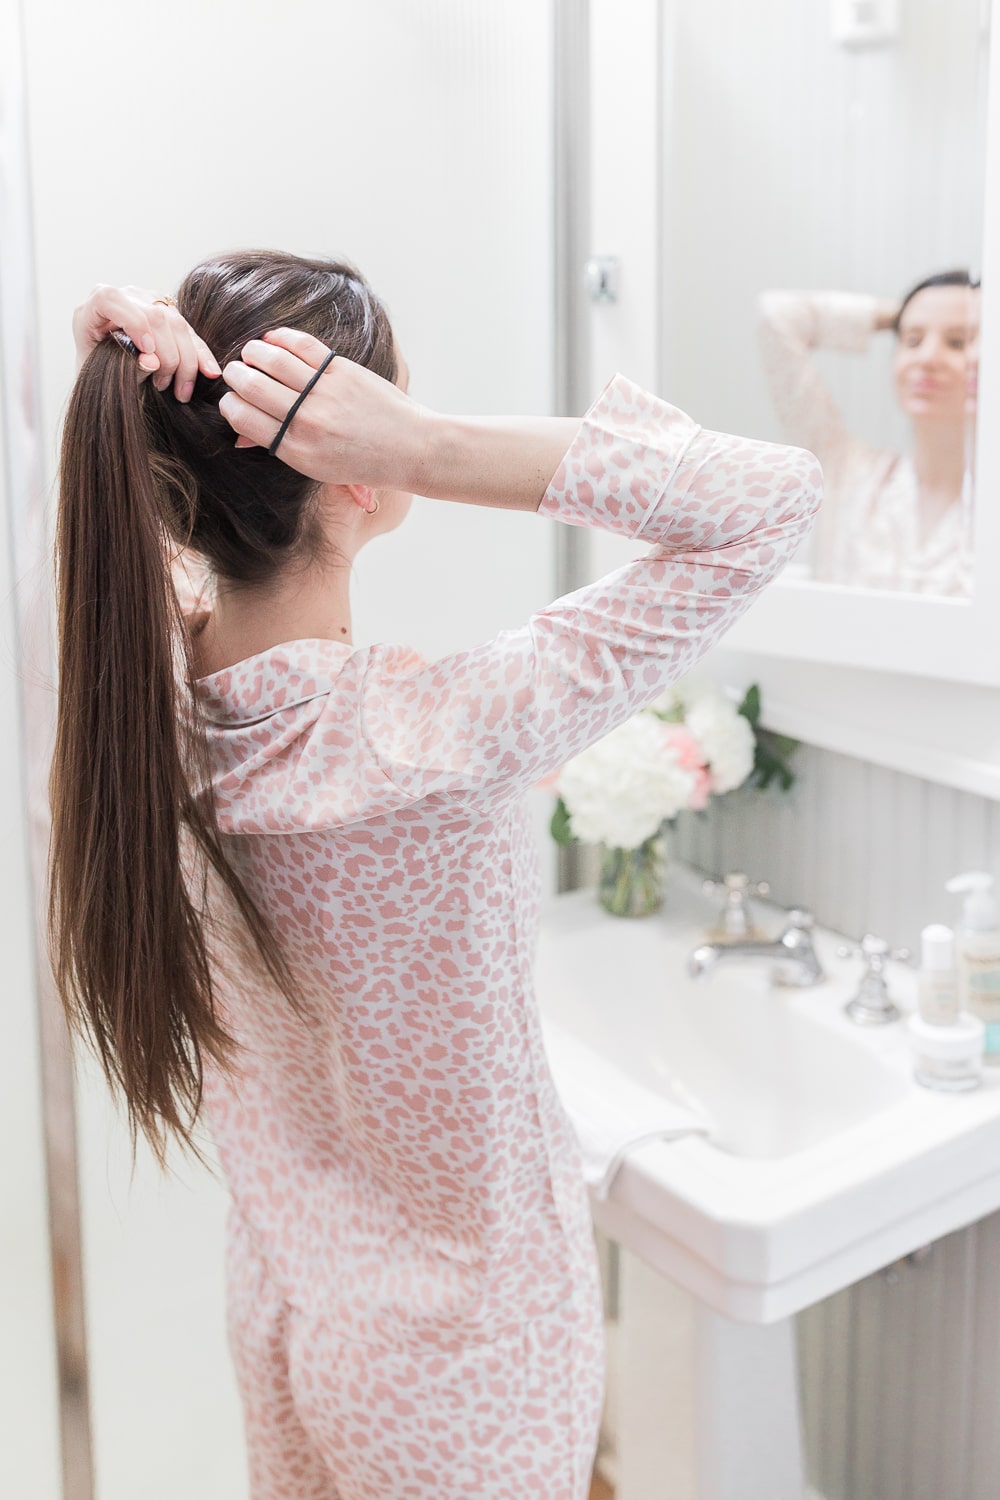 Blogger Stephanie Ziajka shares a winter skincare routine for sensitive skin on Diary of a Debutante